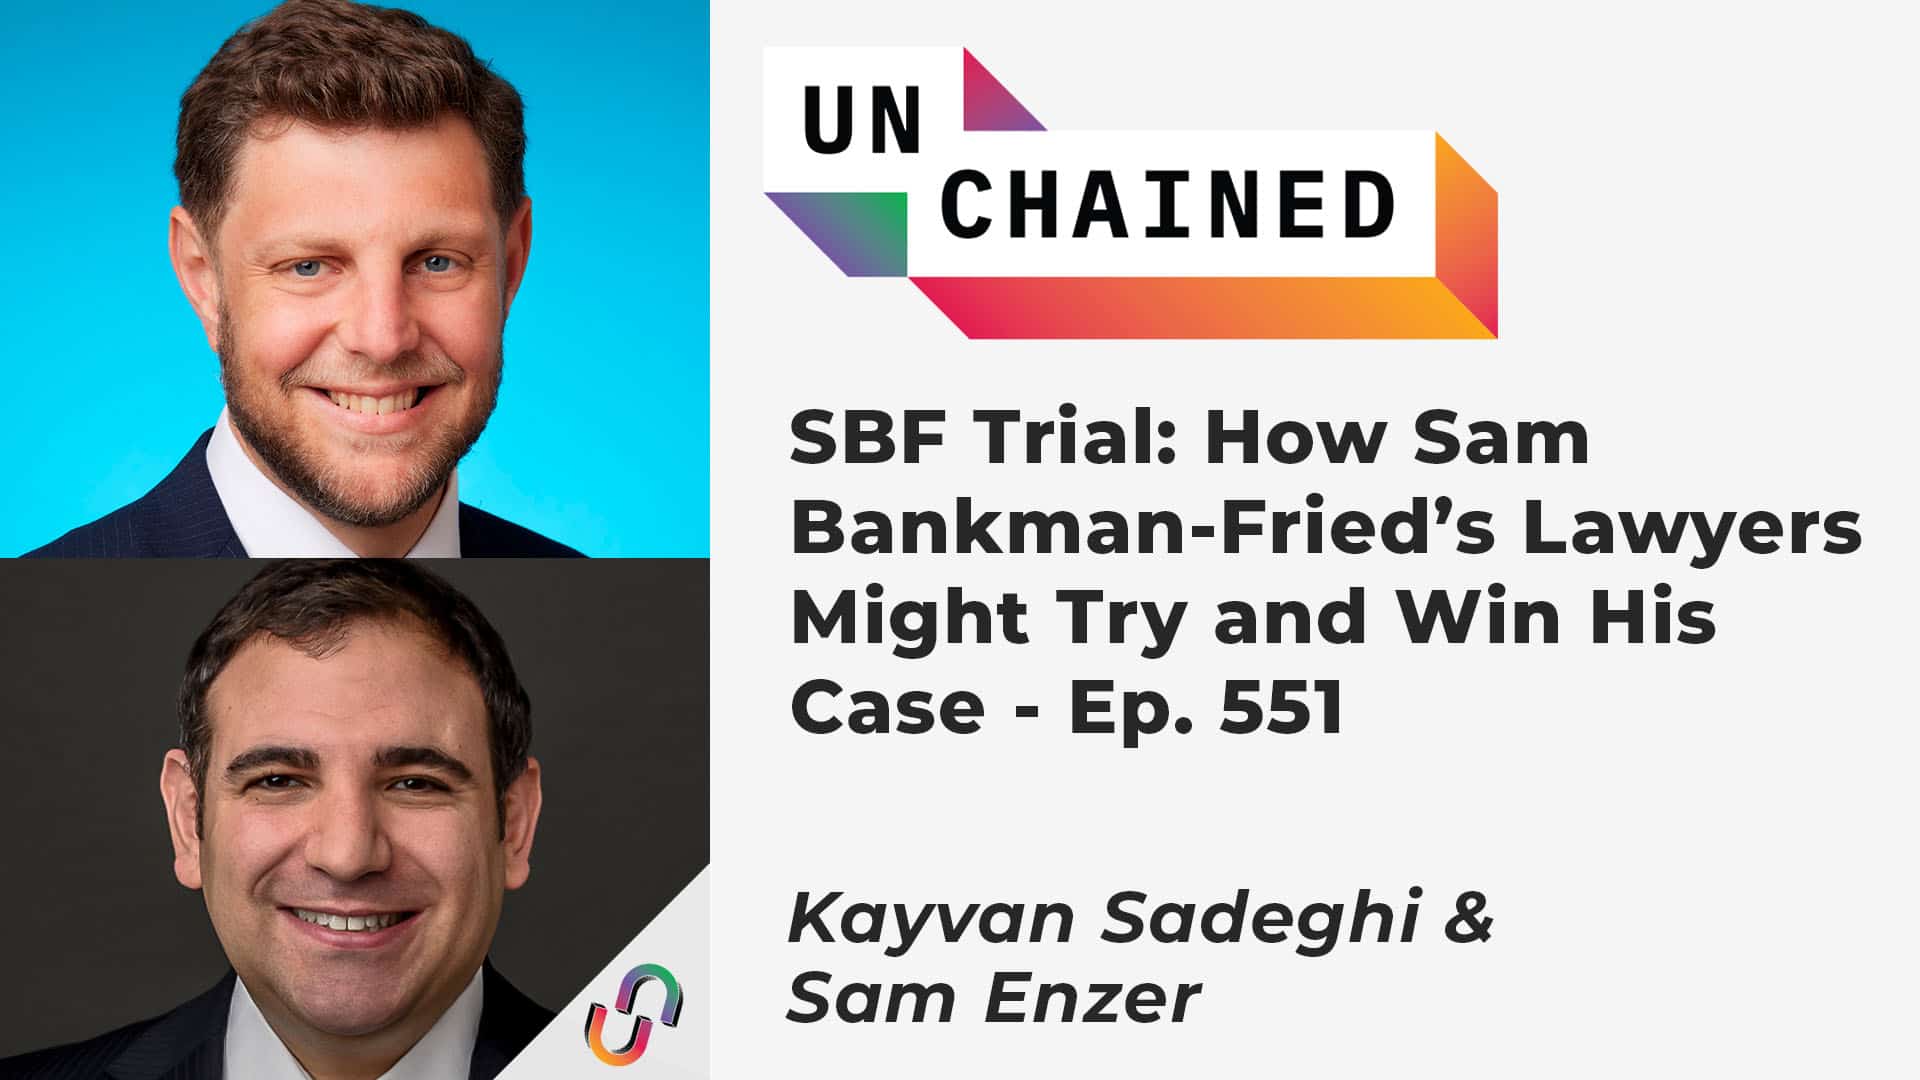 SBF Trial: How Sam Bankman-Fried’s Lawyers Might Try and Win His Case - Ep. 551